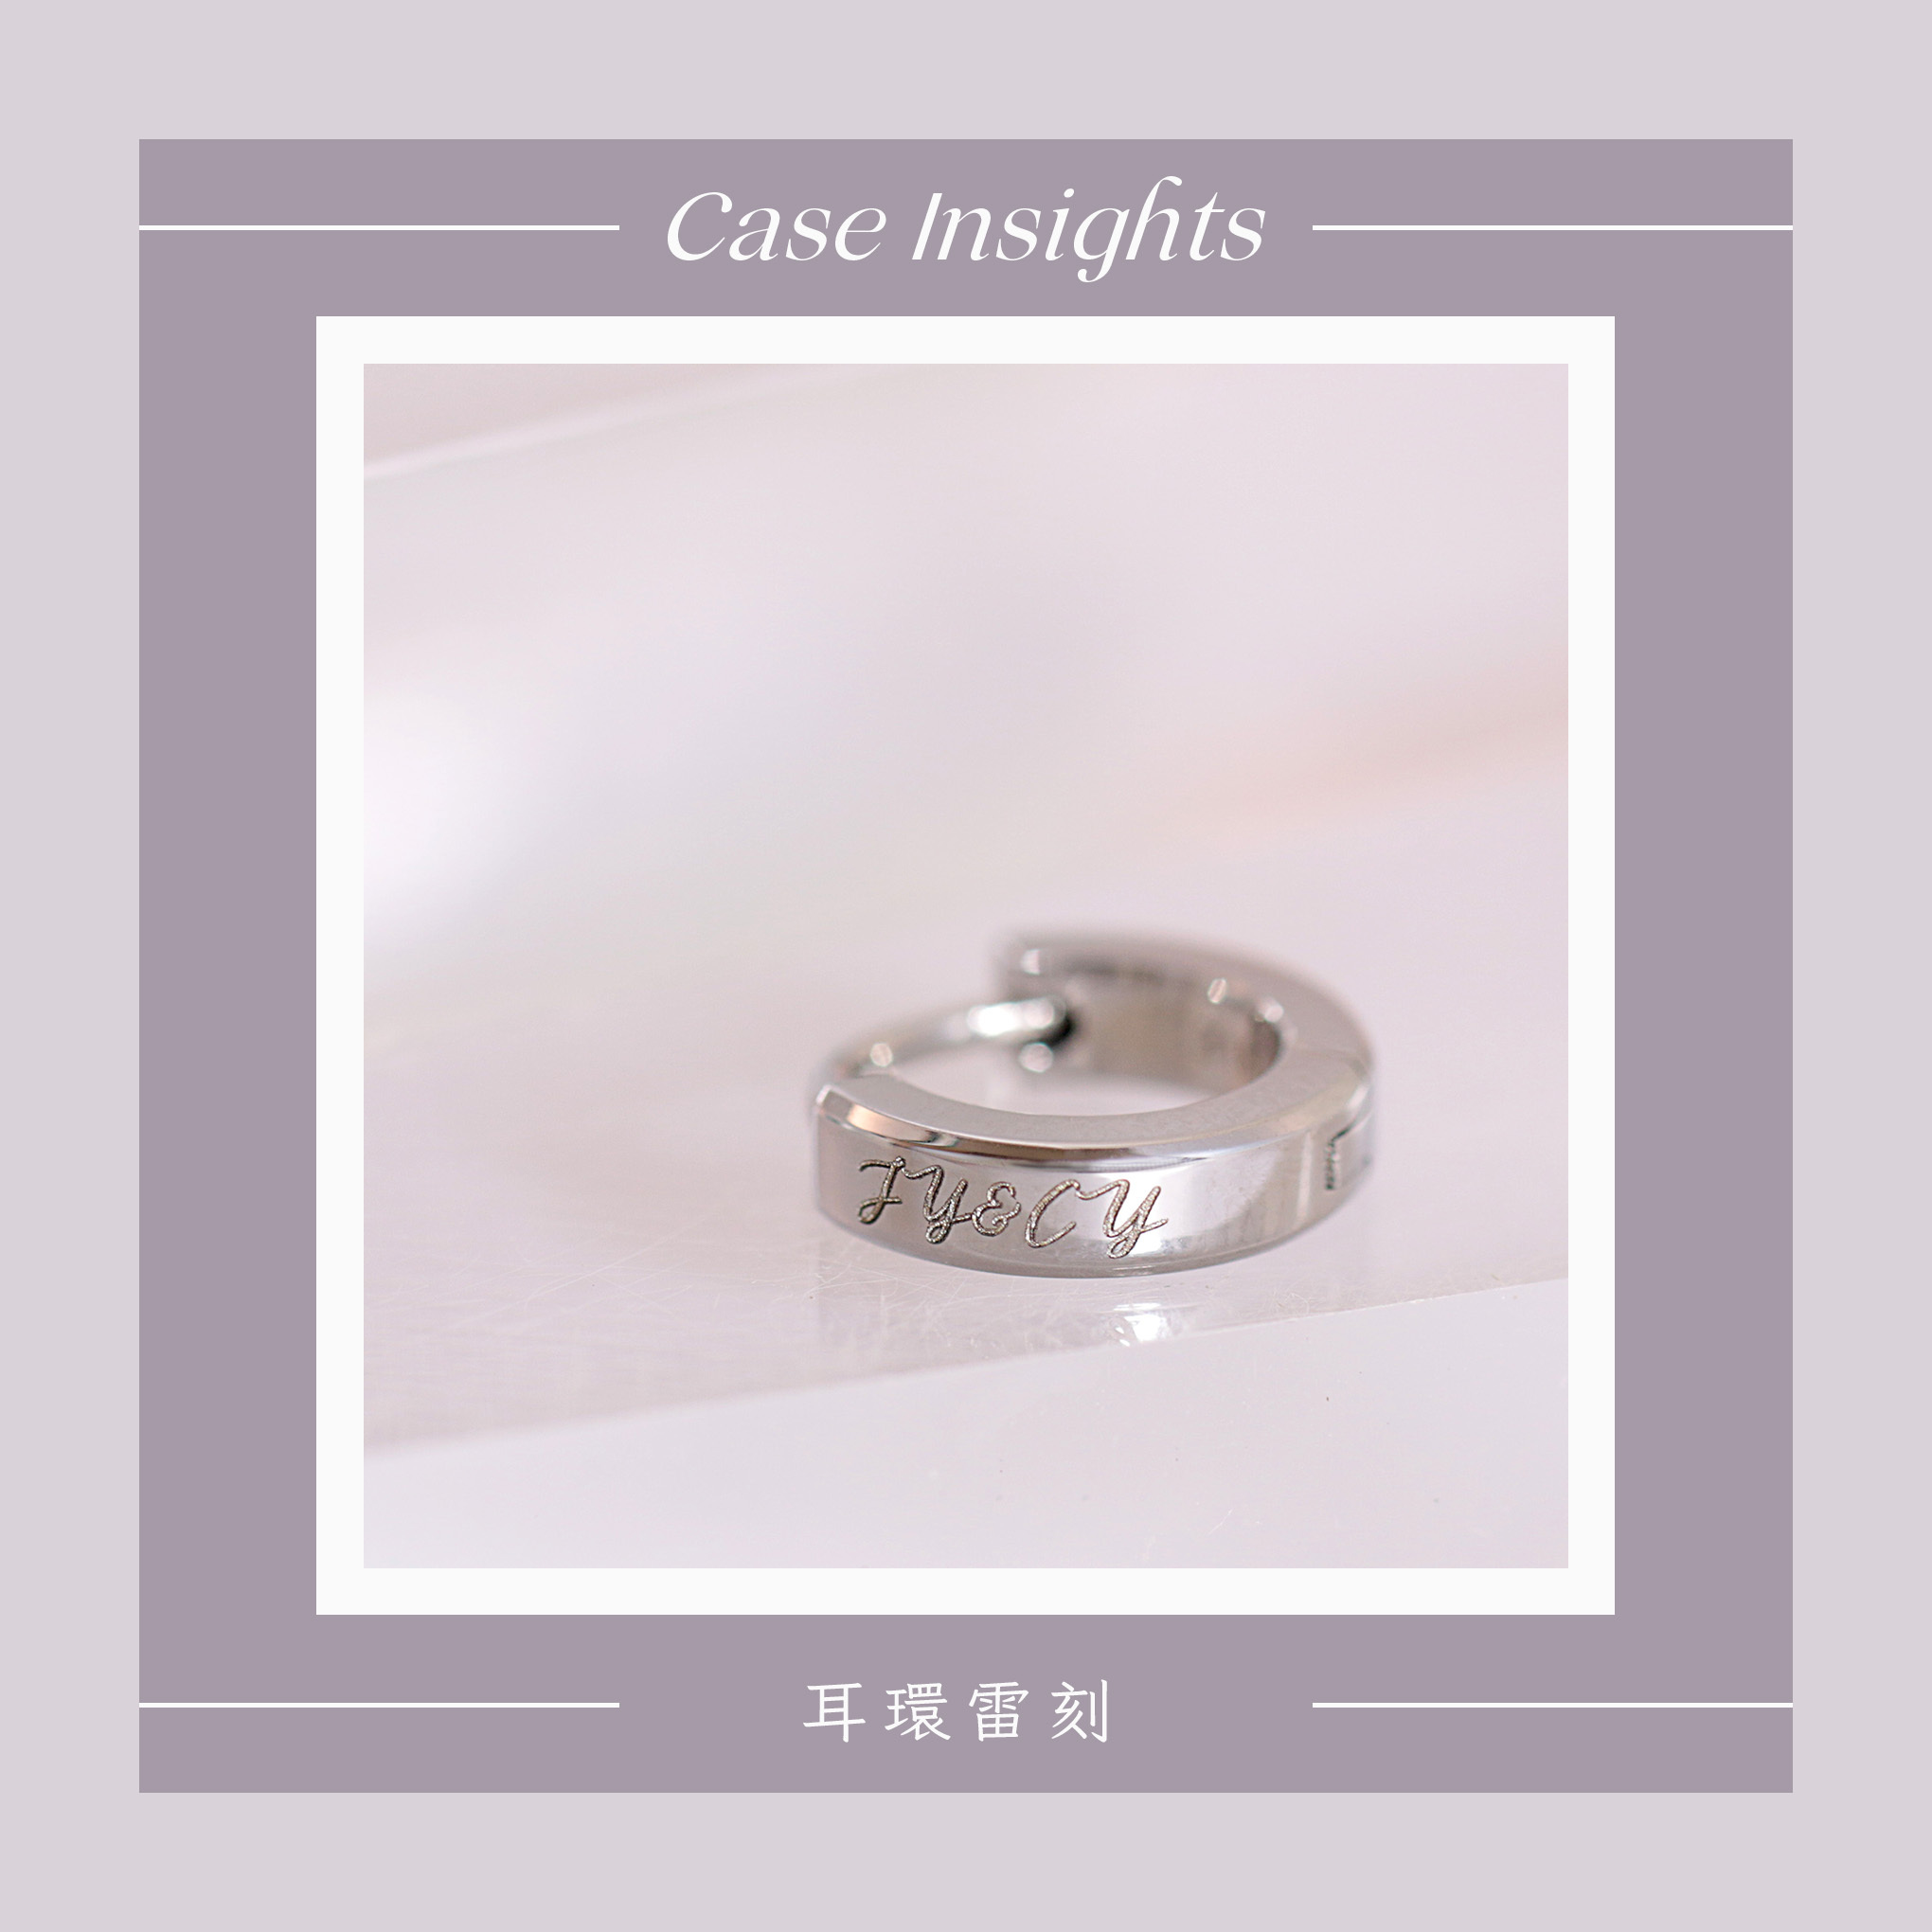 Case insights 05